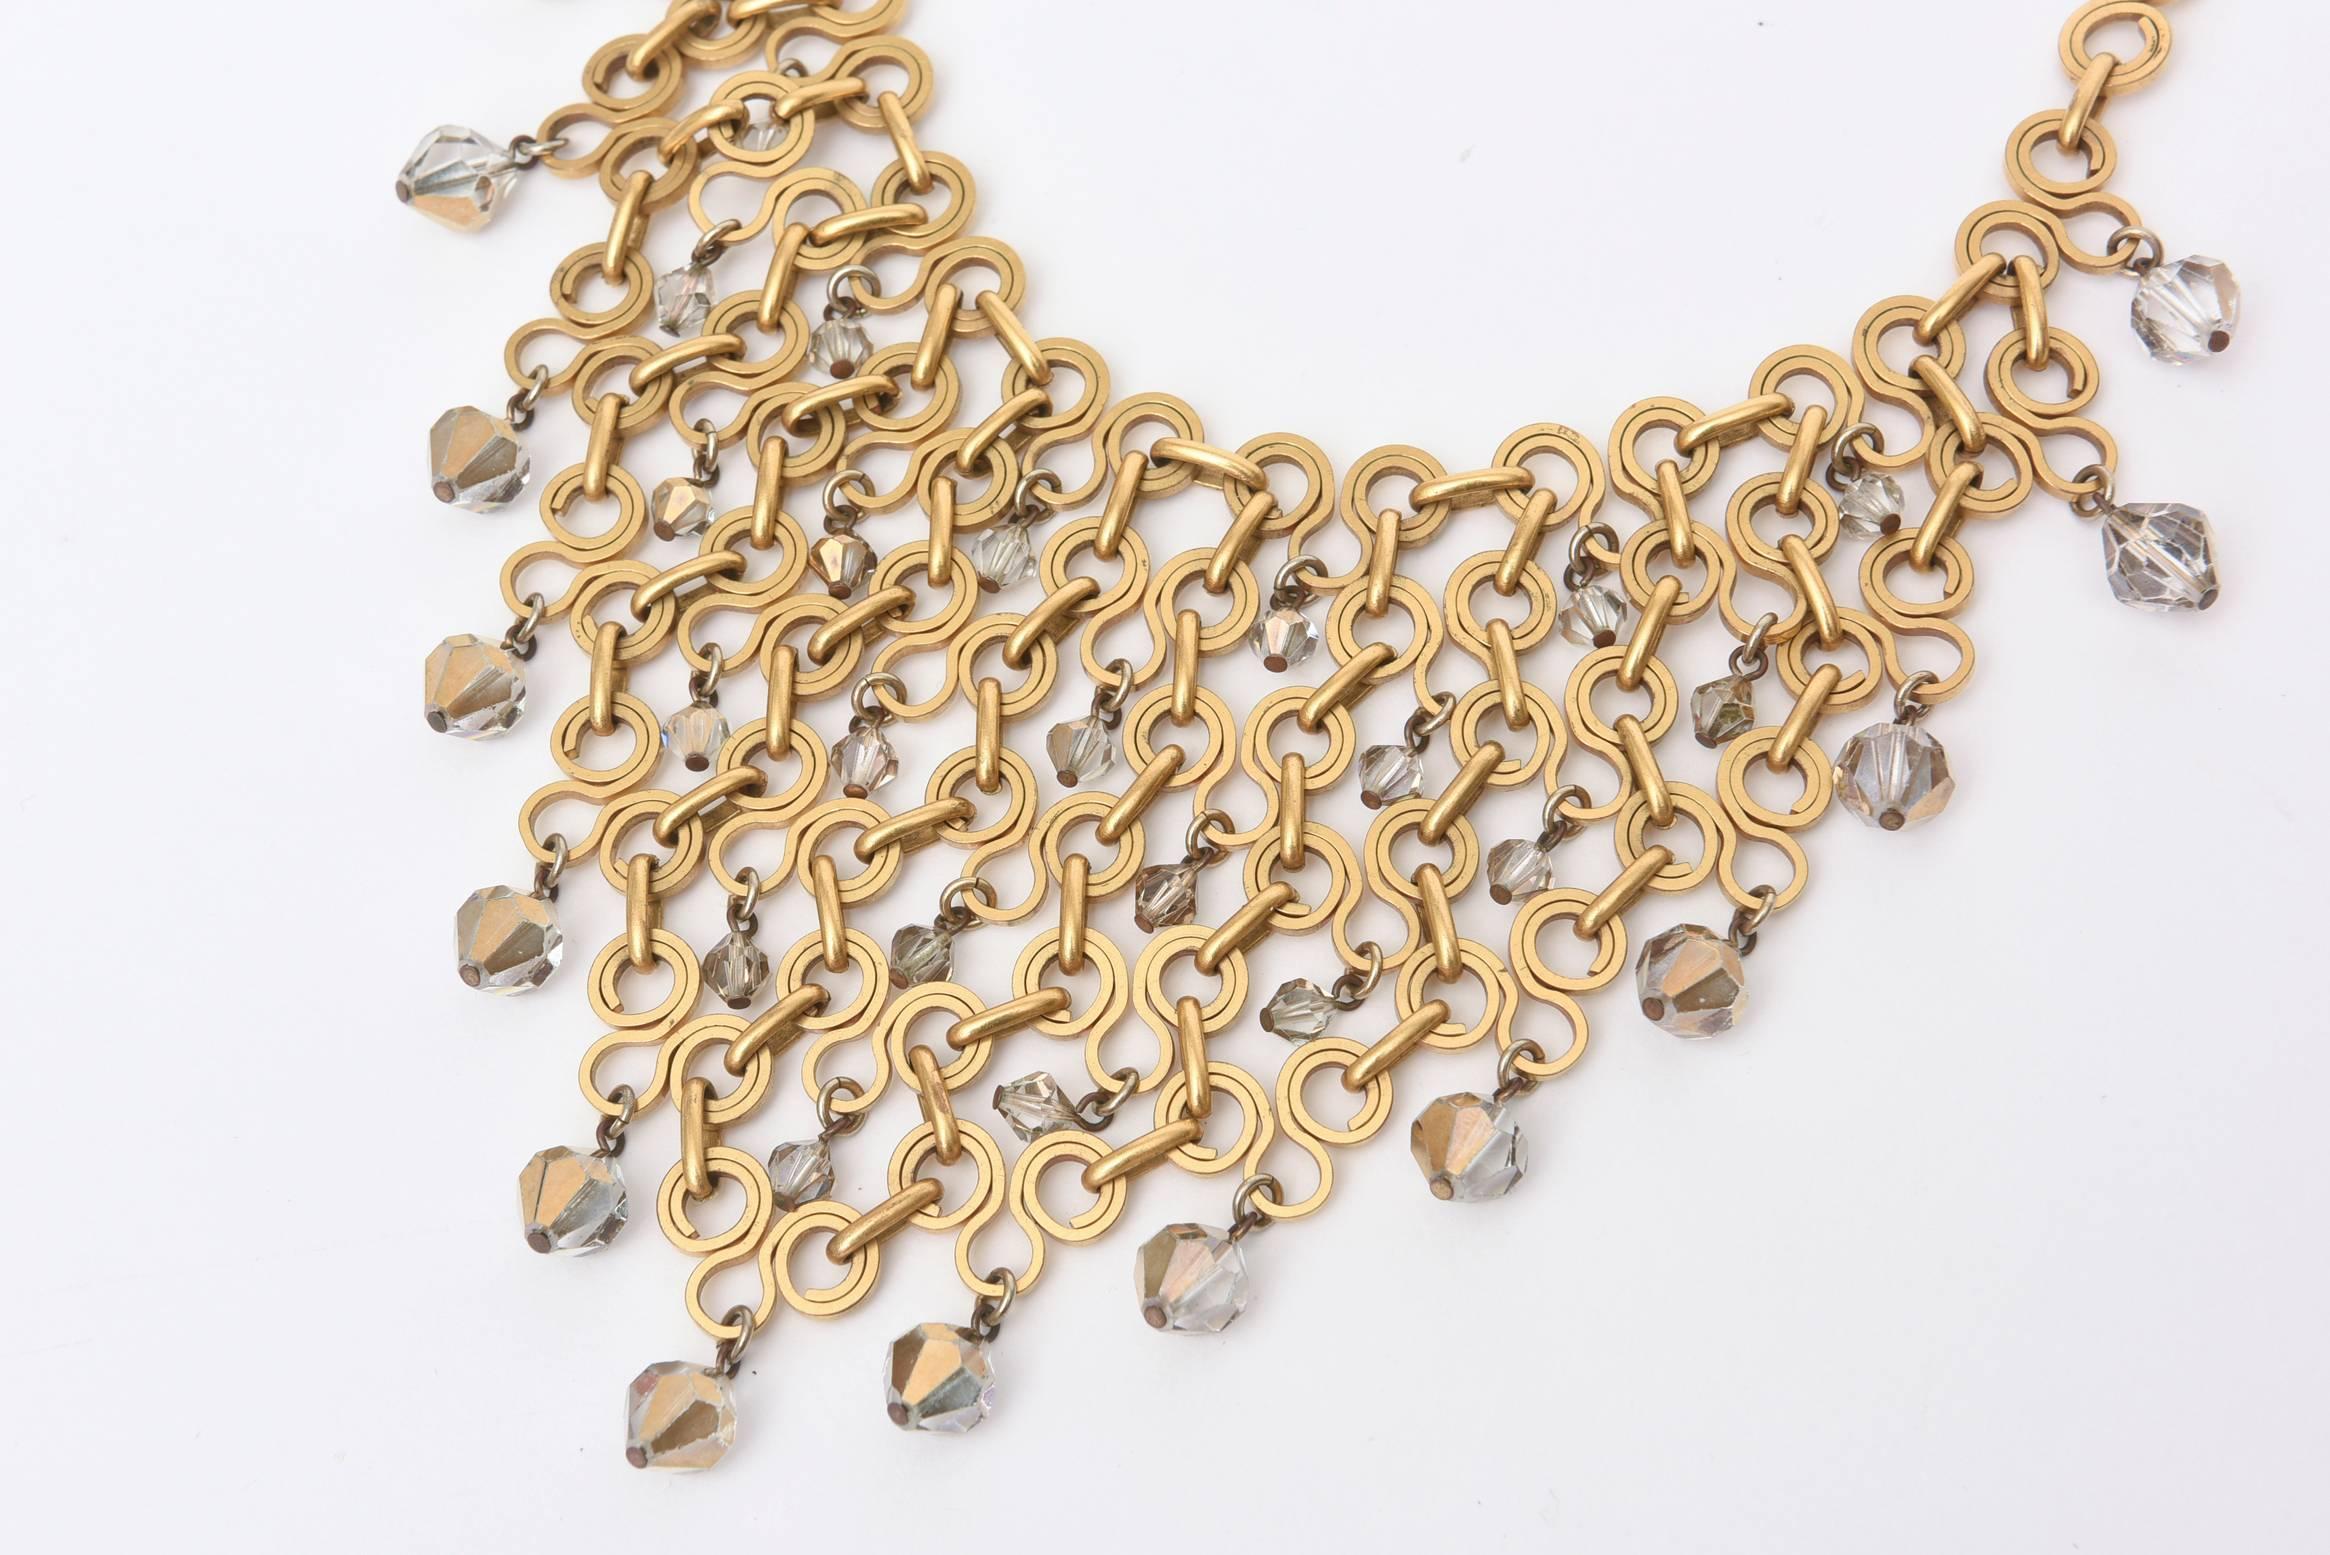 This wonderful french bib geometric necklace has been attributed to Paco Rabanne, but is not signed. The inter-connecting, geometric brass links are with with fine precision and the faceted crystals are Swarovski in gray to radiant clear glass.